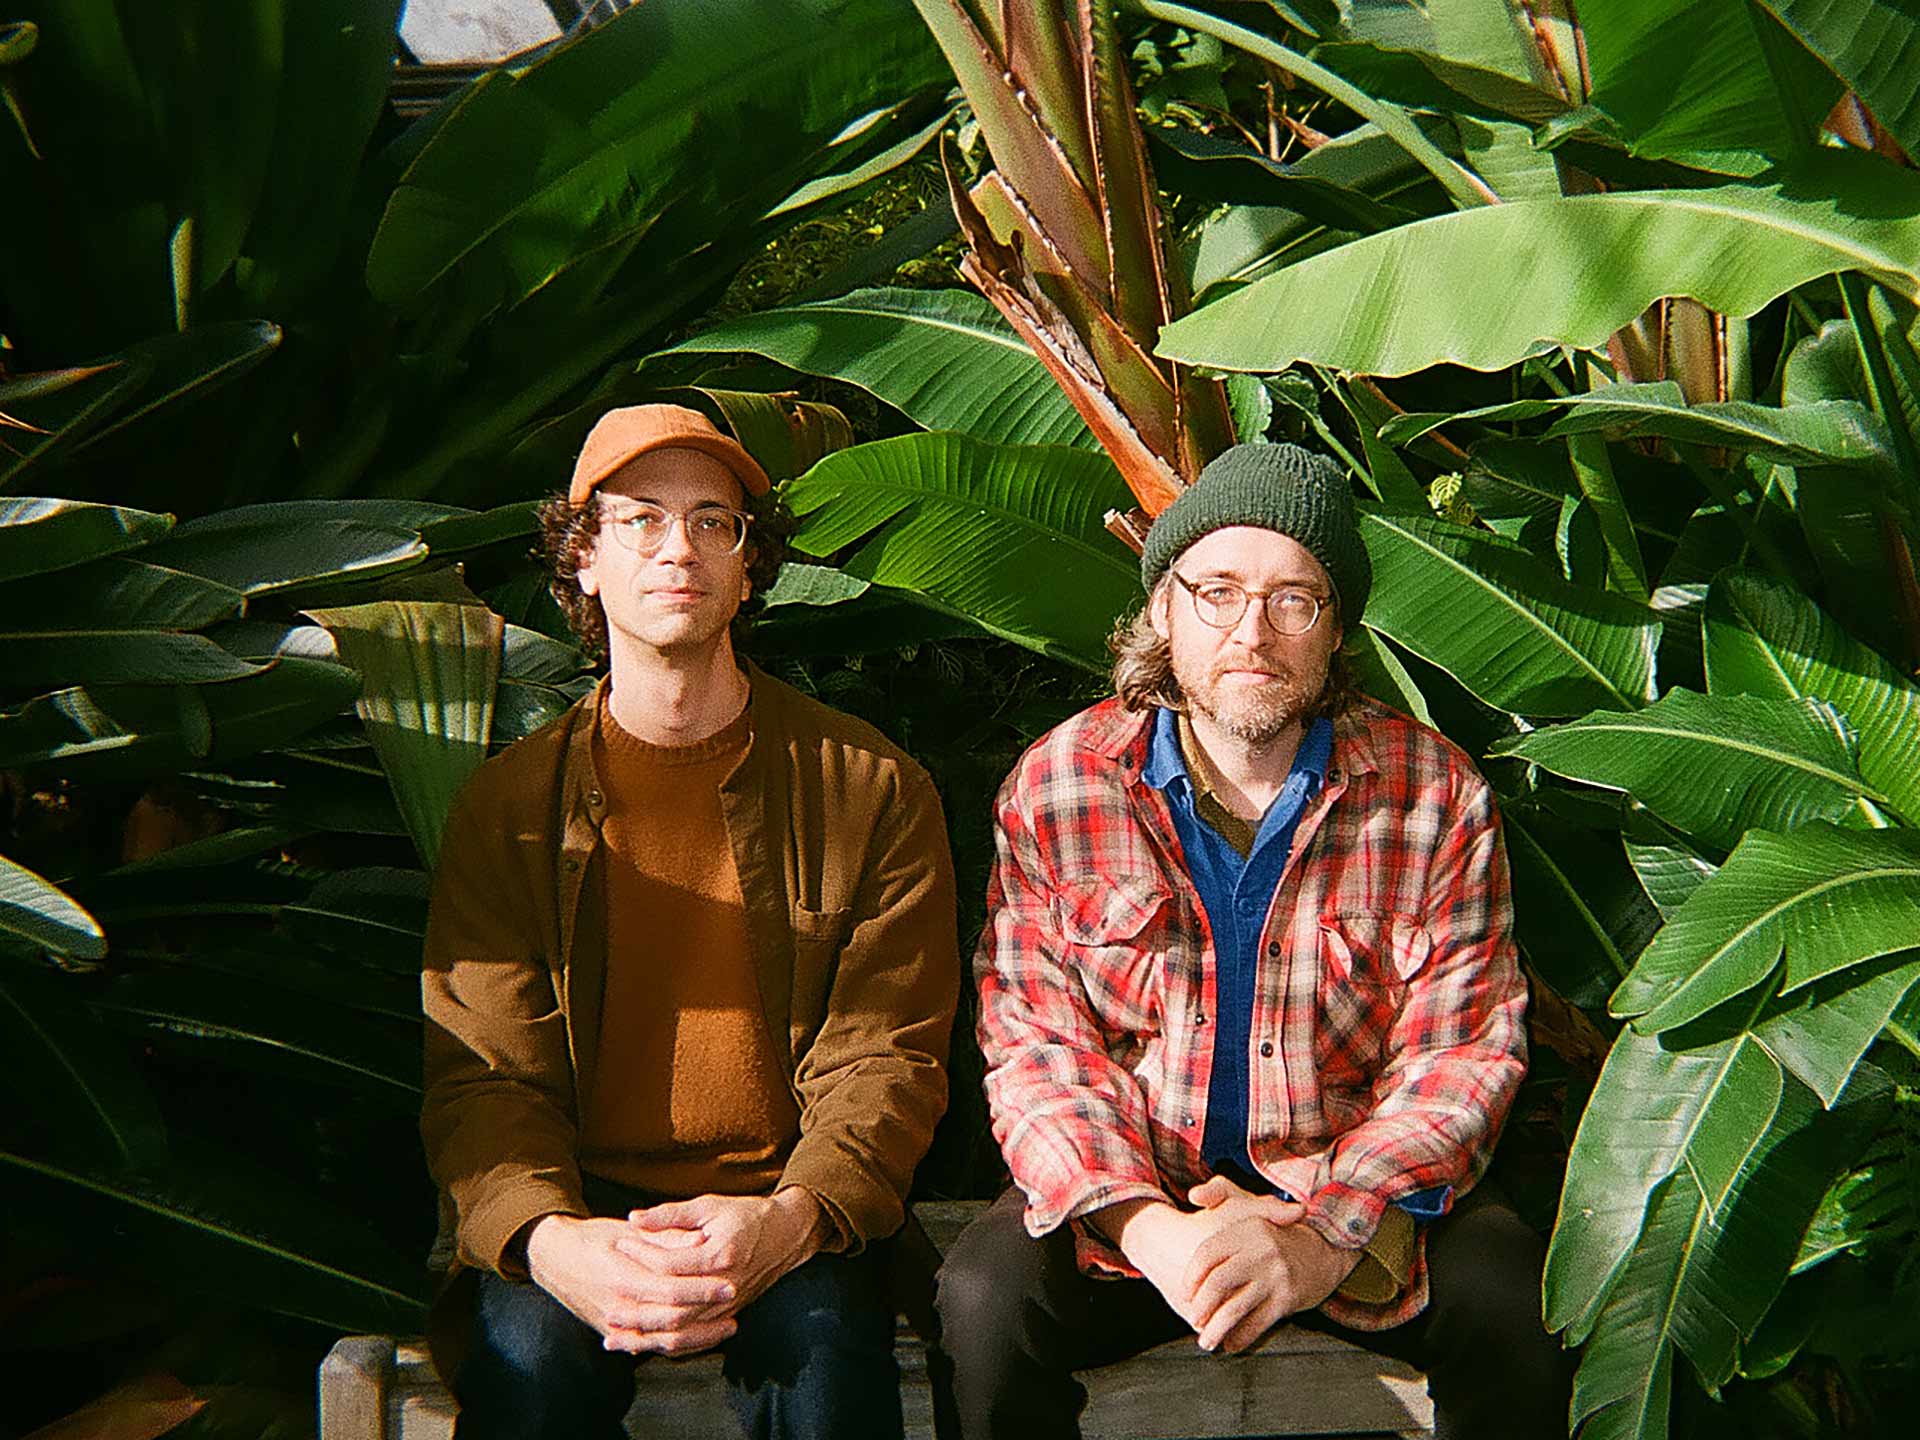 Bruce Willen and Albert Birney, two white men with glasses, hats, and medium length hair sit amidst large tropical plant leaves.